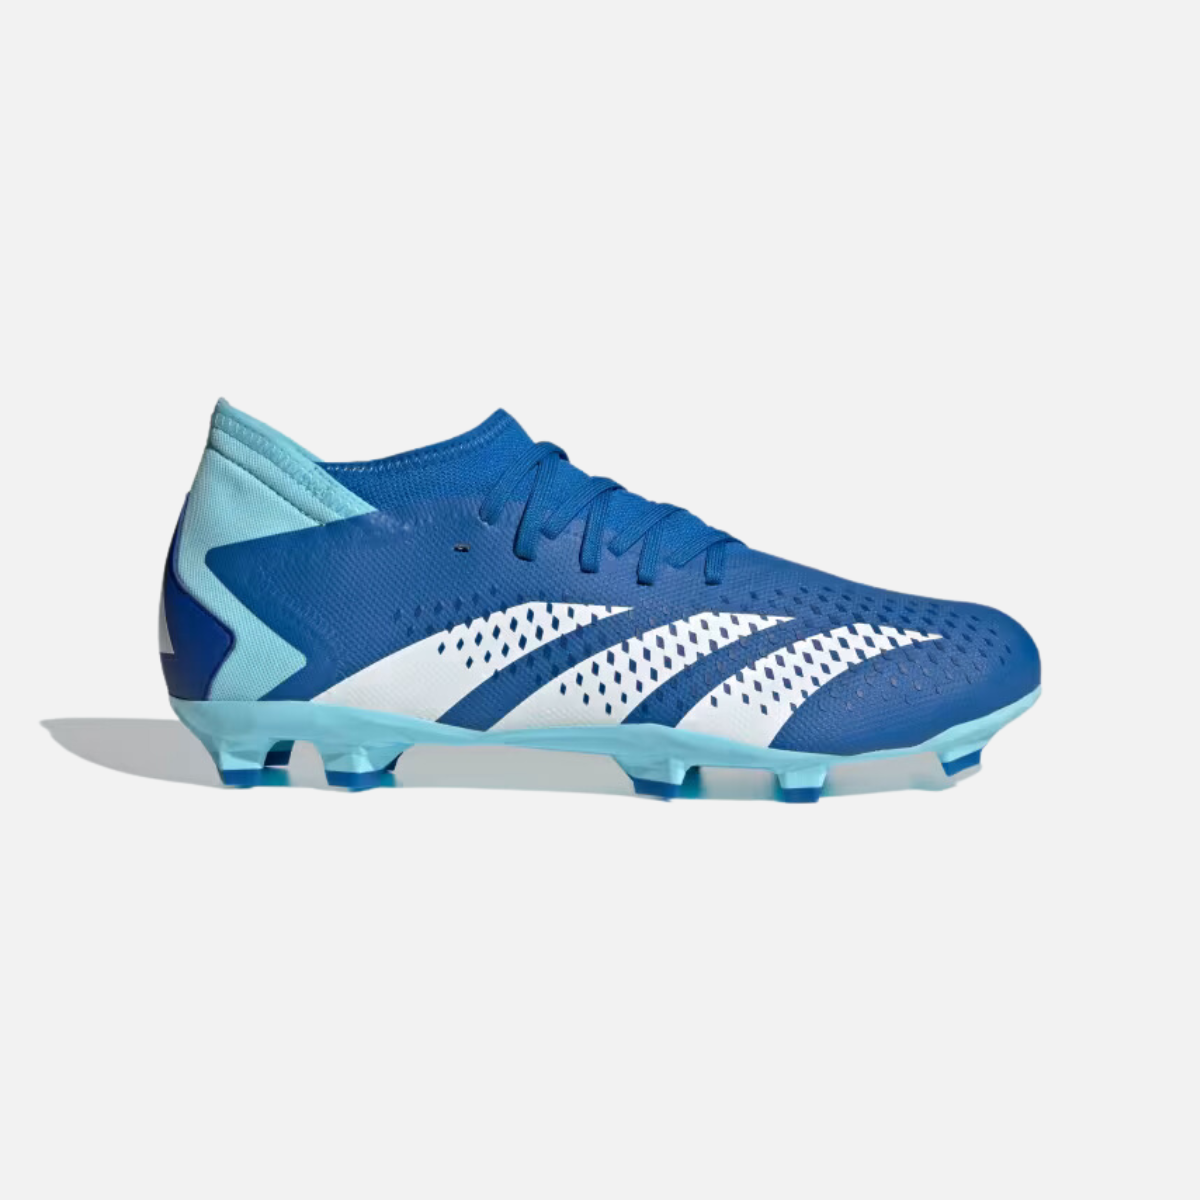 Adidas Predator Accuracy.3 Firm Ground Football Boots -Bright Royal/Cloud White/Bliss Blue